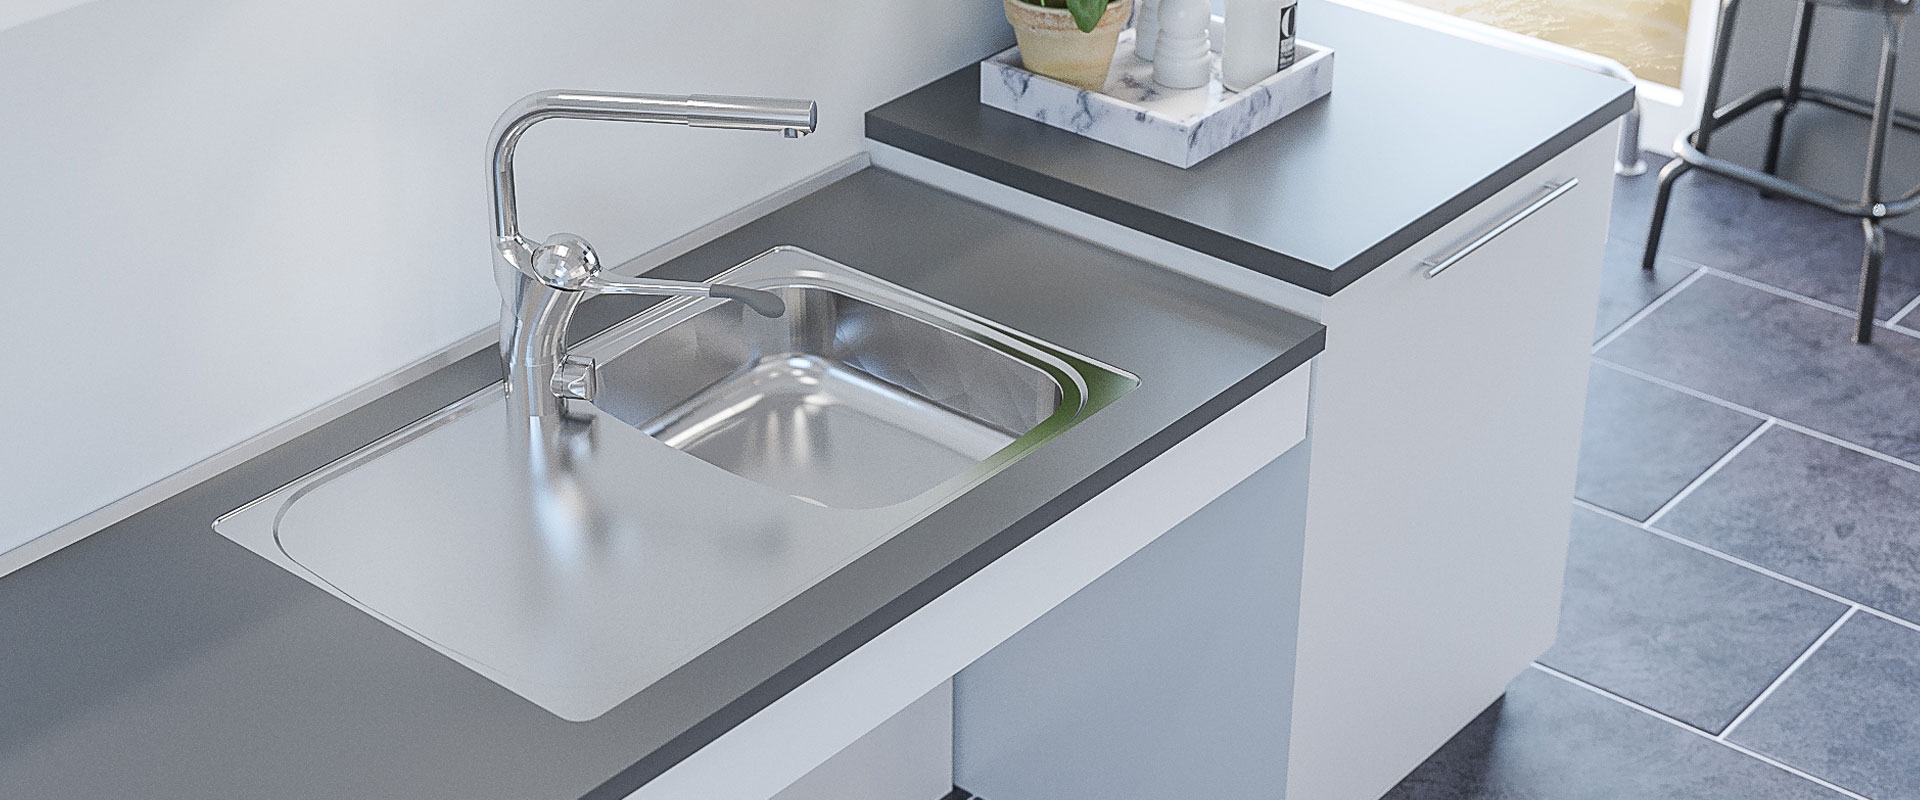 Wheelchair Accessible Sinks & taps 